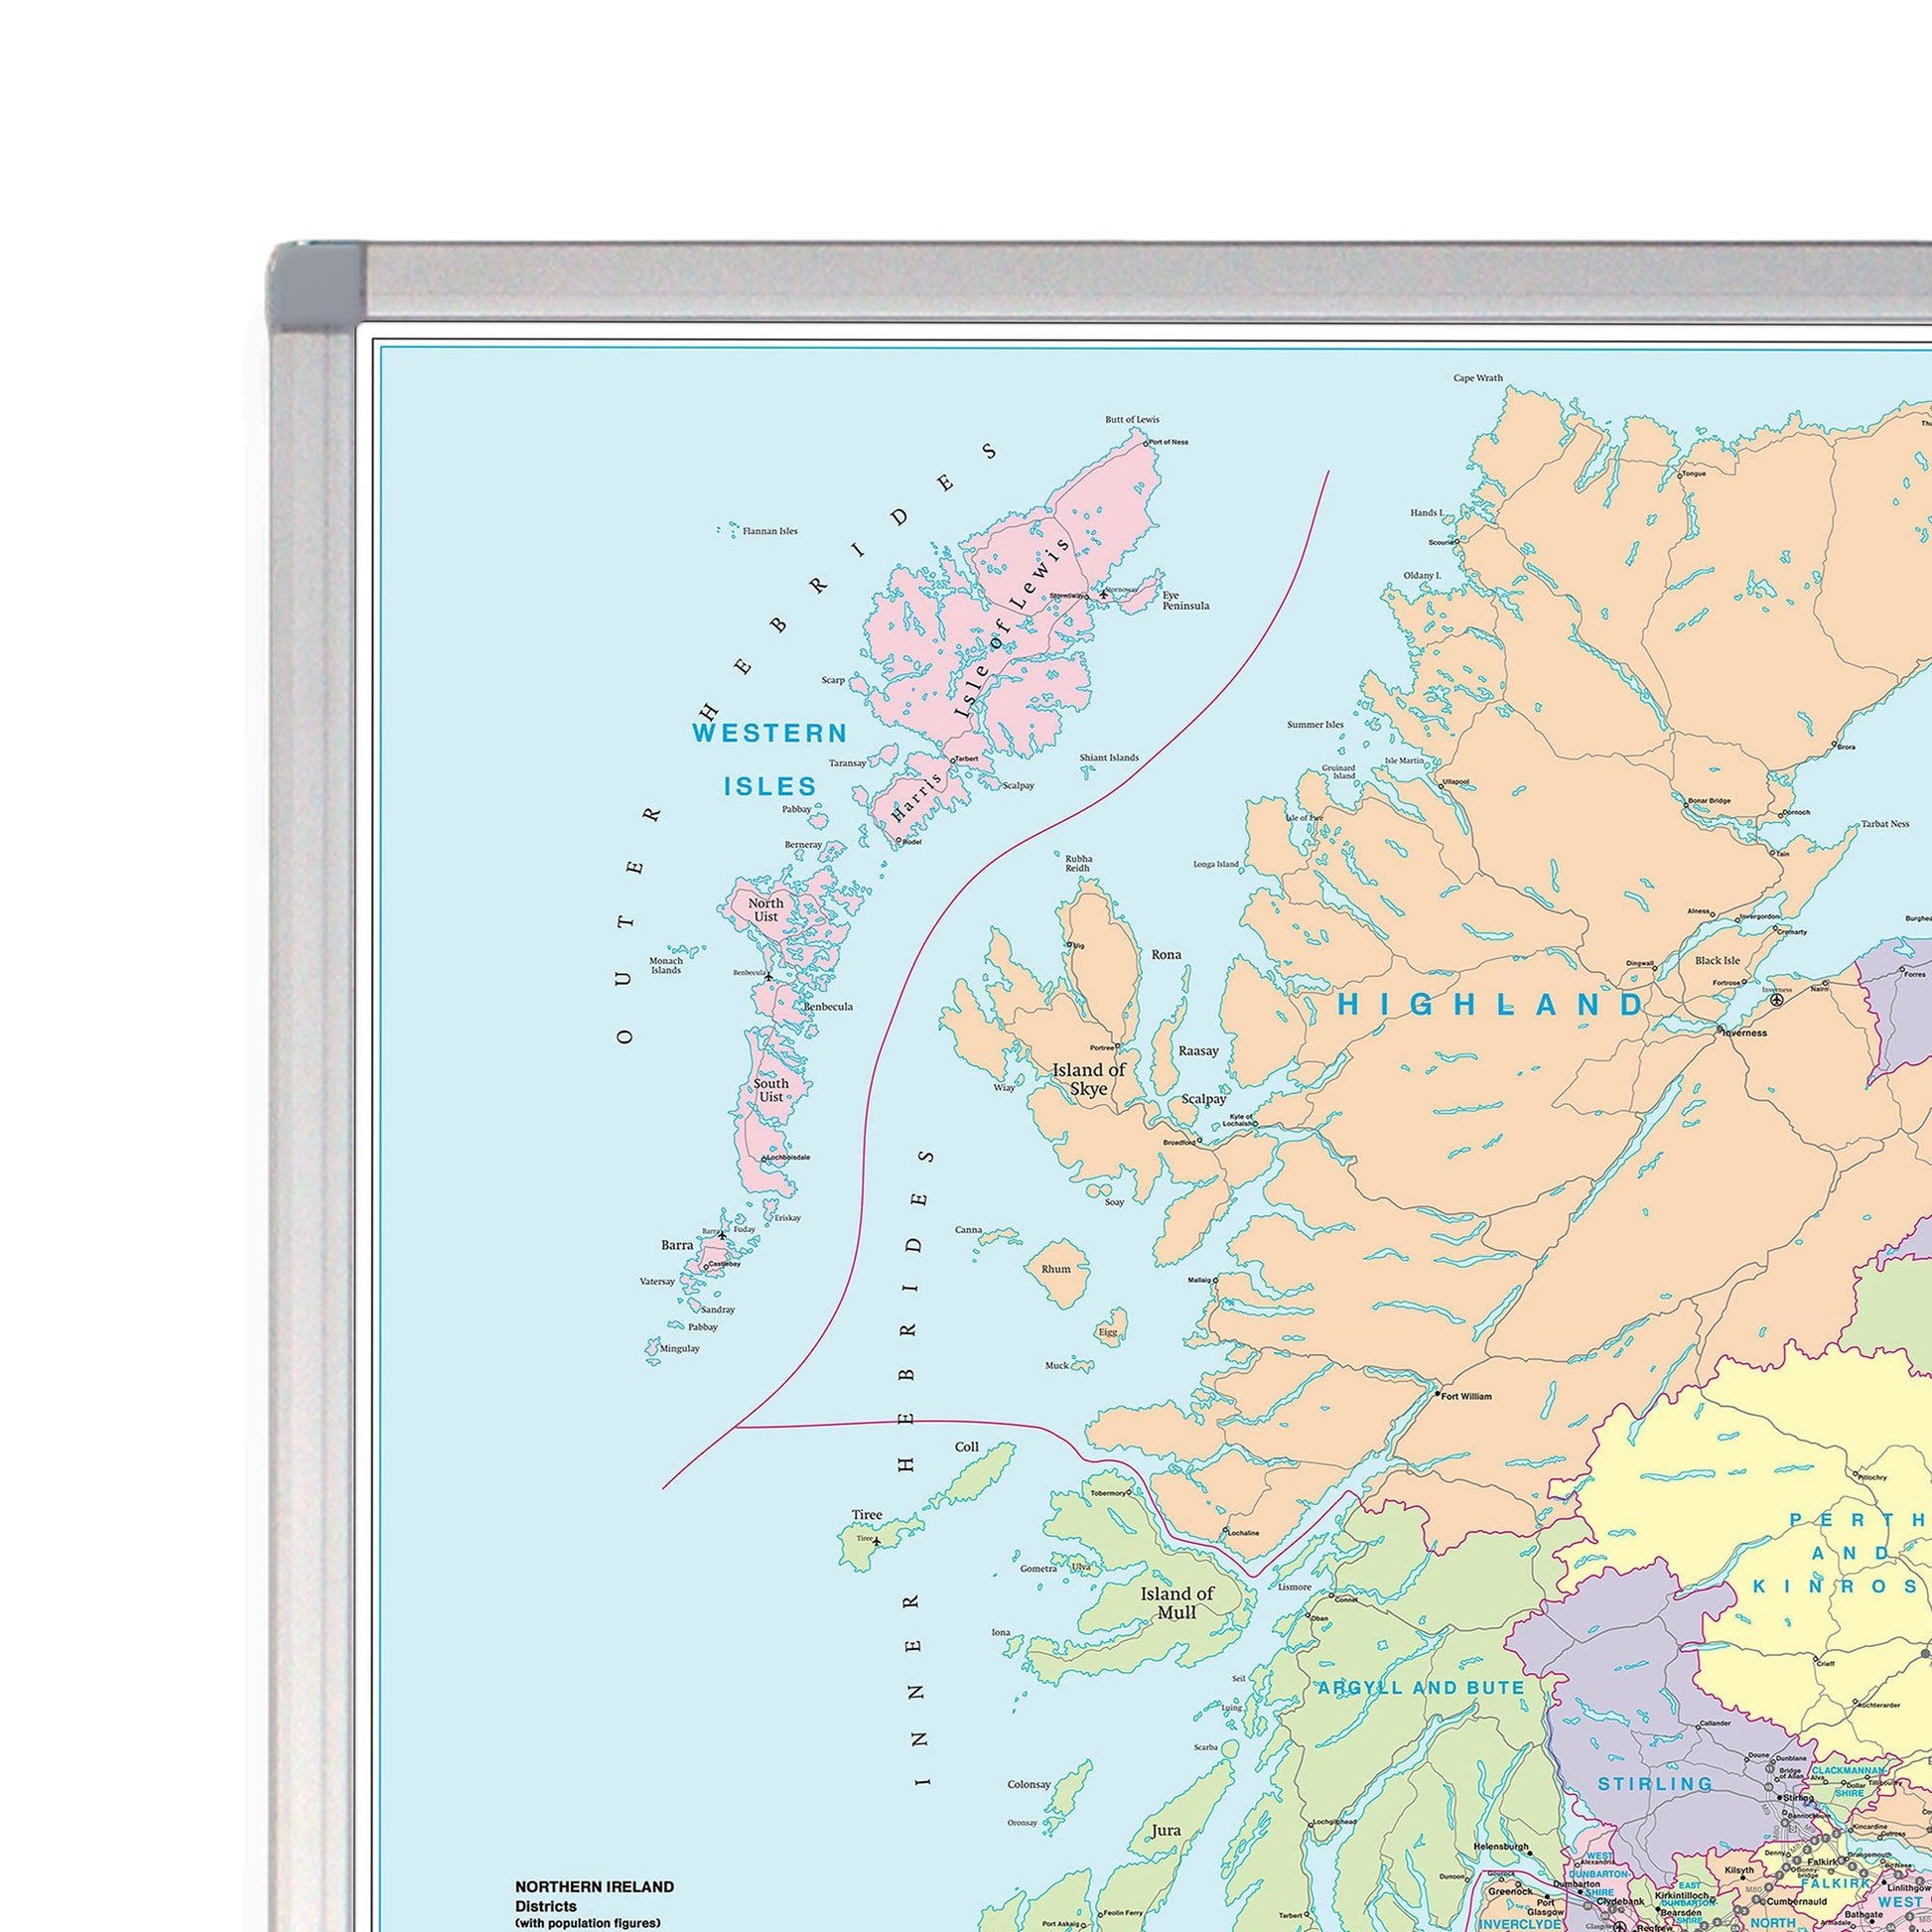 Wall Maps - Scottish Highlands (North) - Postcode Sector Map 34